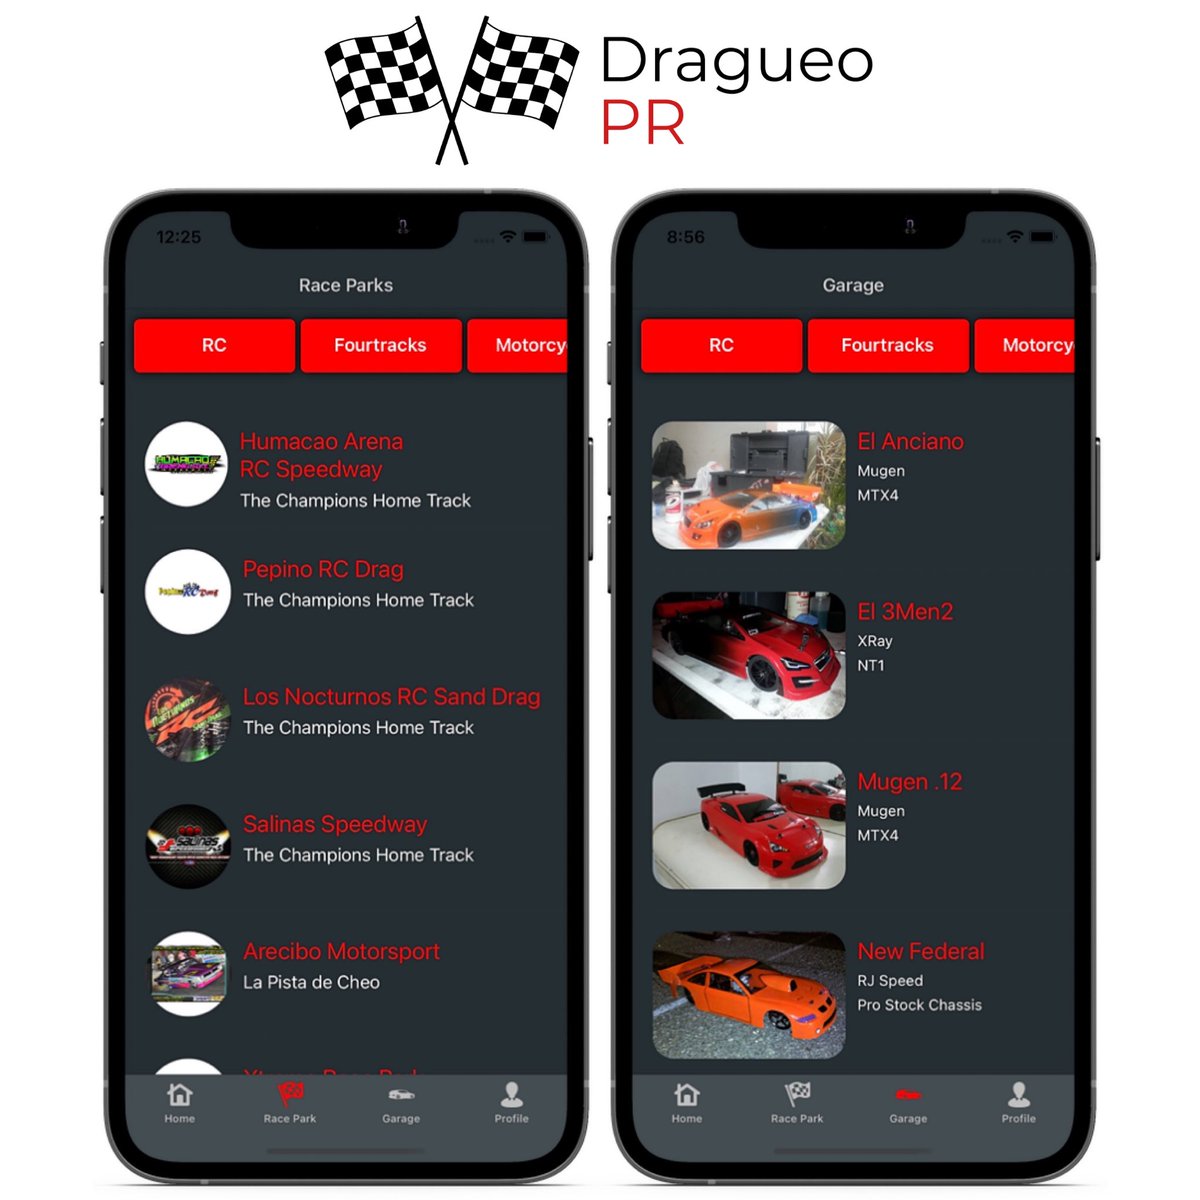 App preview...
#dragracing #racing #dragrace #turbo #nhra #racecar #ford #chevy #m #streetracing #cars #drag #s #mustang #dragcar #nitrous #dragracinglife #dragracingphotos #dragster #carsofinstagram #dragbike #grudgeracing #camaro #supercharged #boost #streetcar #smalltire #race